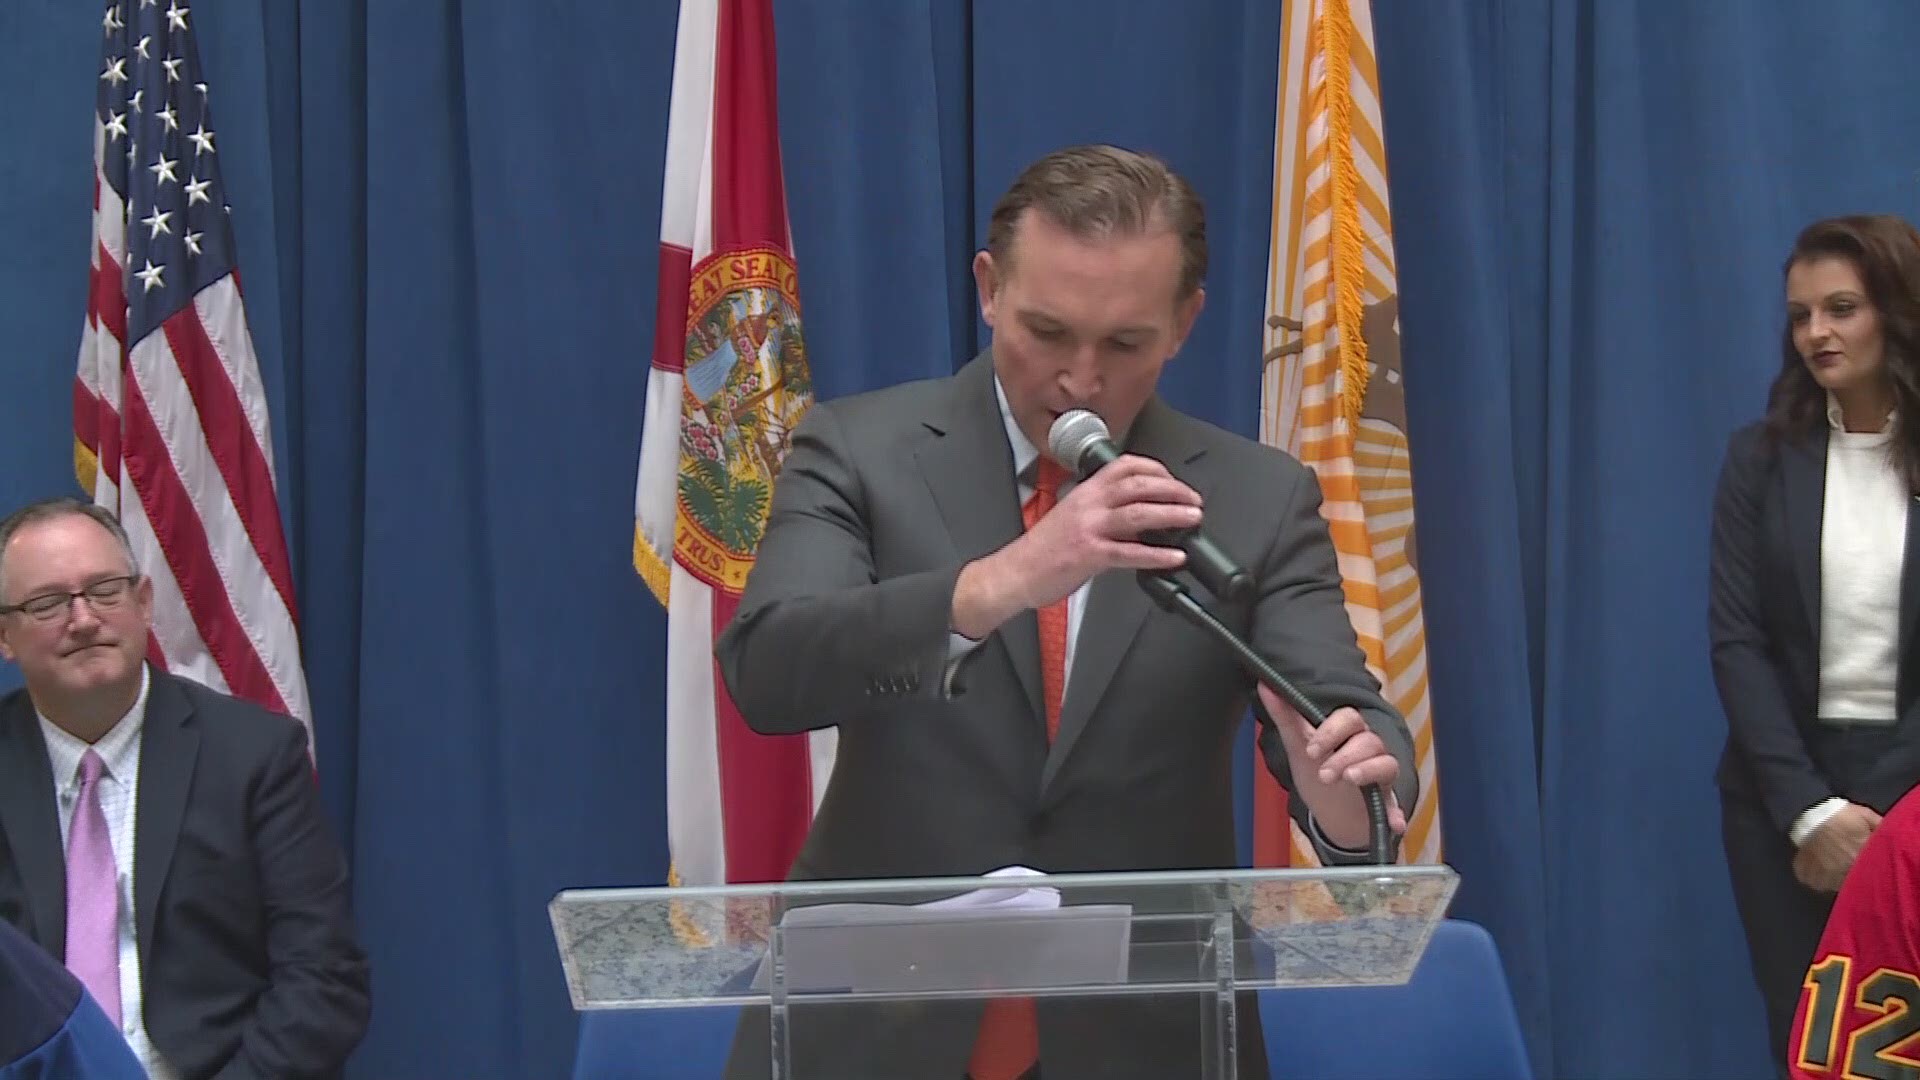 During a Guns N' Hoses Hockey Match announcement, Mayor Lenny Curry delivers a few remarks on the DUI crash that killed JSO employee Cathy Adams over the weekend.